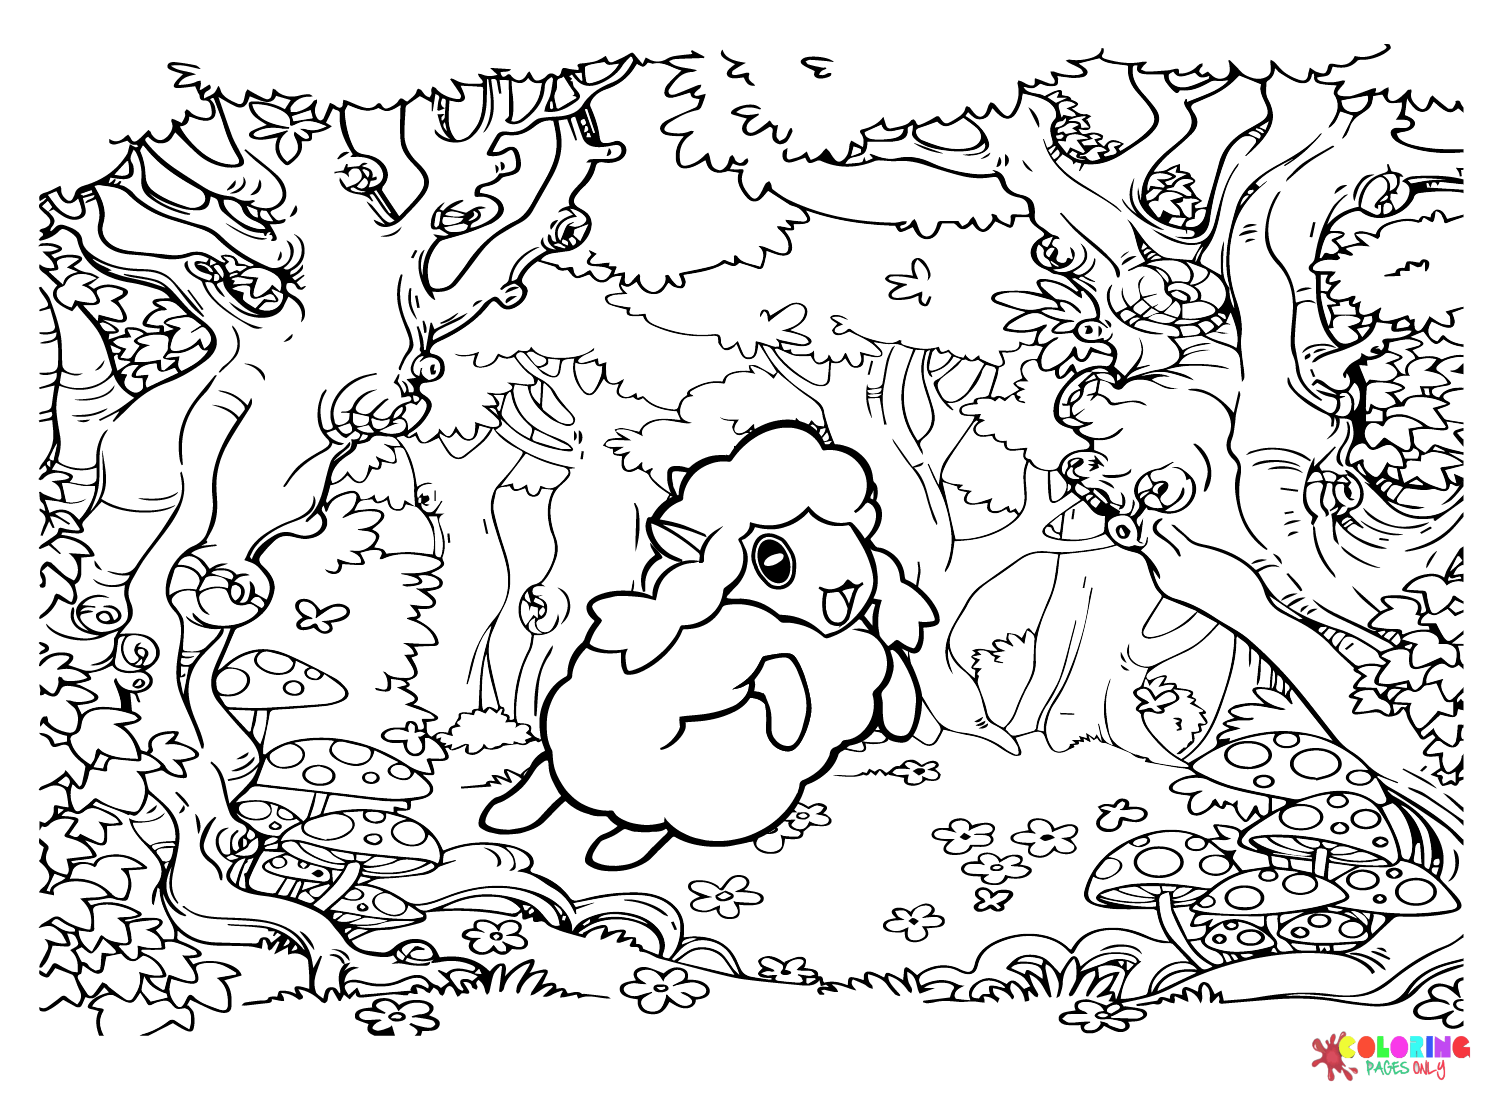 Wooloo to Print Coloring Pages - Wooloo Coloring Pages - Раскраски для ...